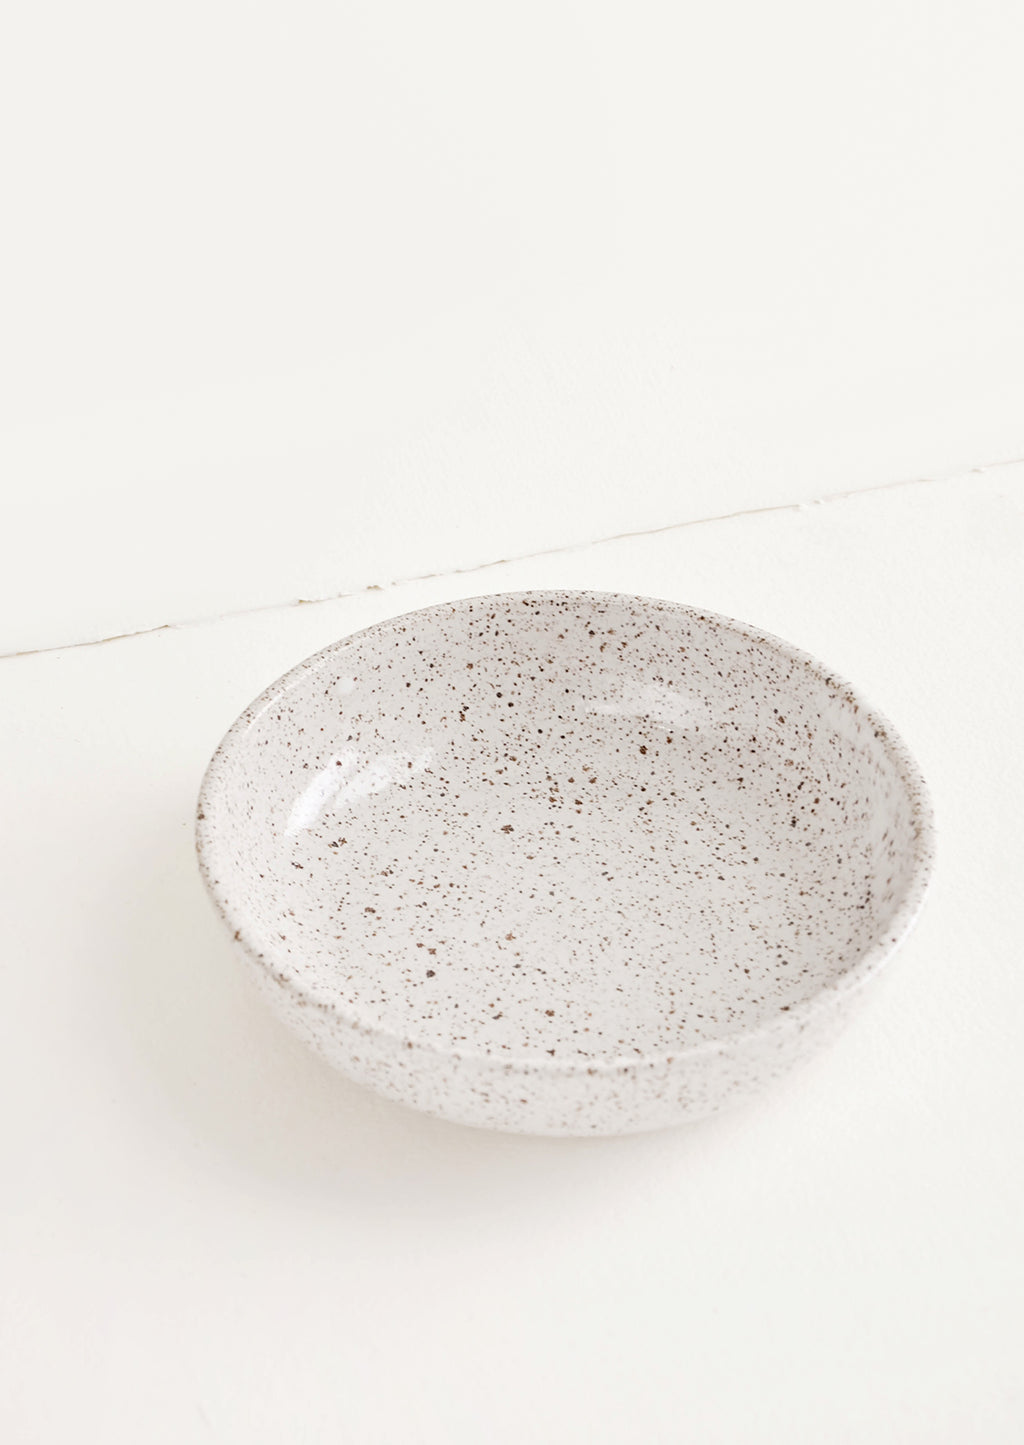 Salad Bowl [$48.00]: Shallow ceramic bowl, ideal for salad, in white glaze with brown speckles.